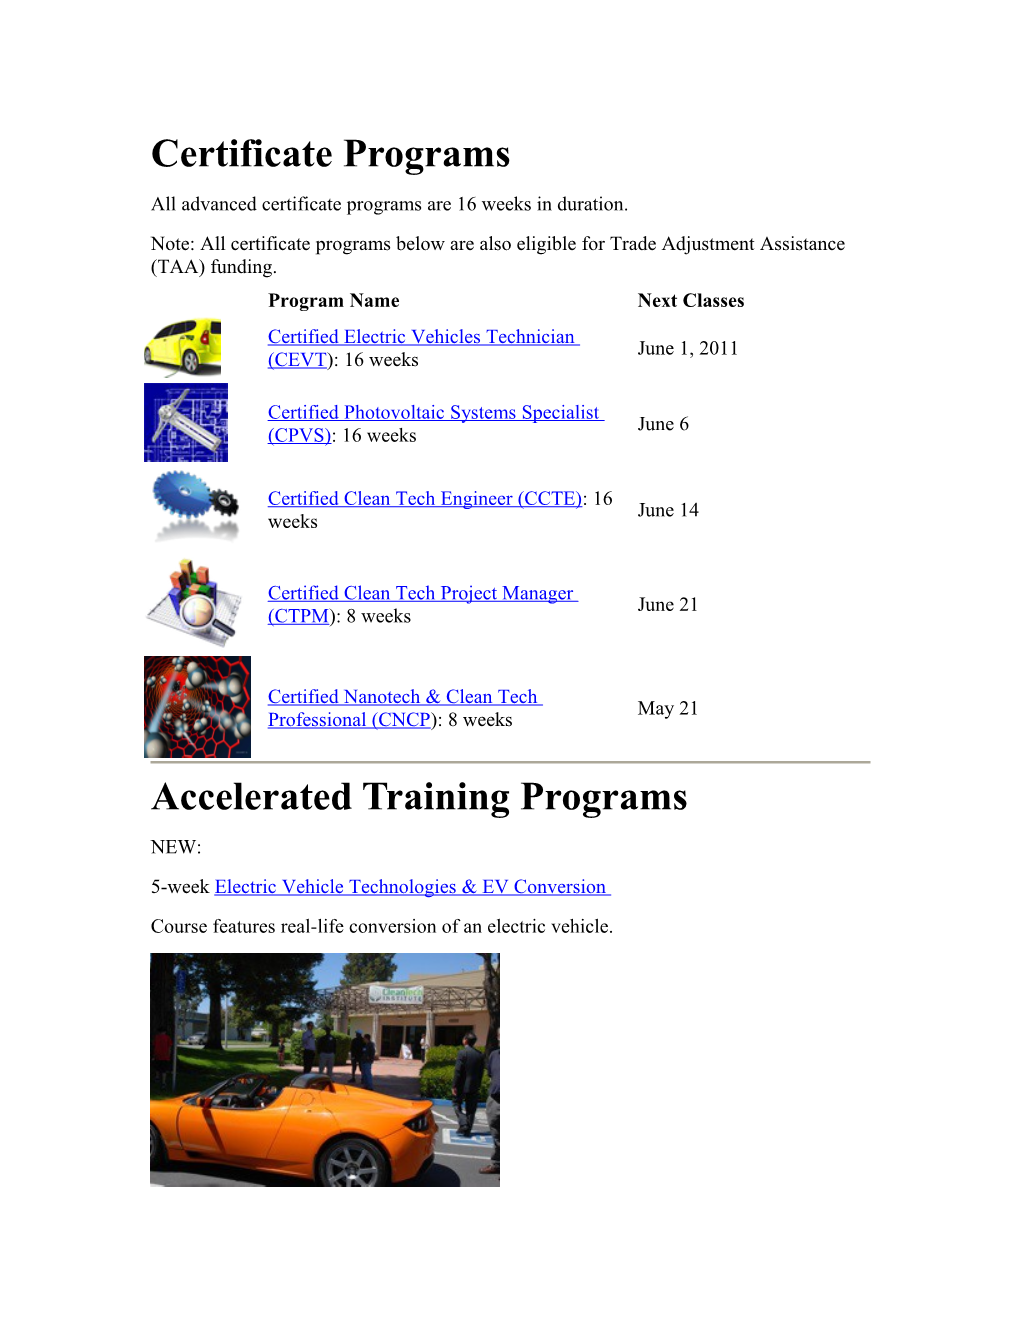 All Advanced Certificate Programs Are 16 Weeks in Duration